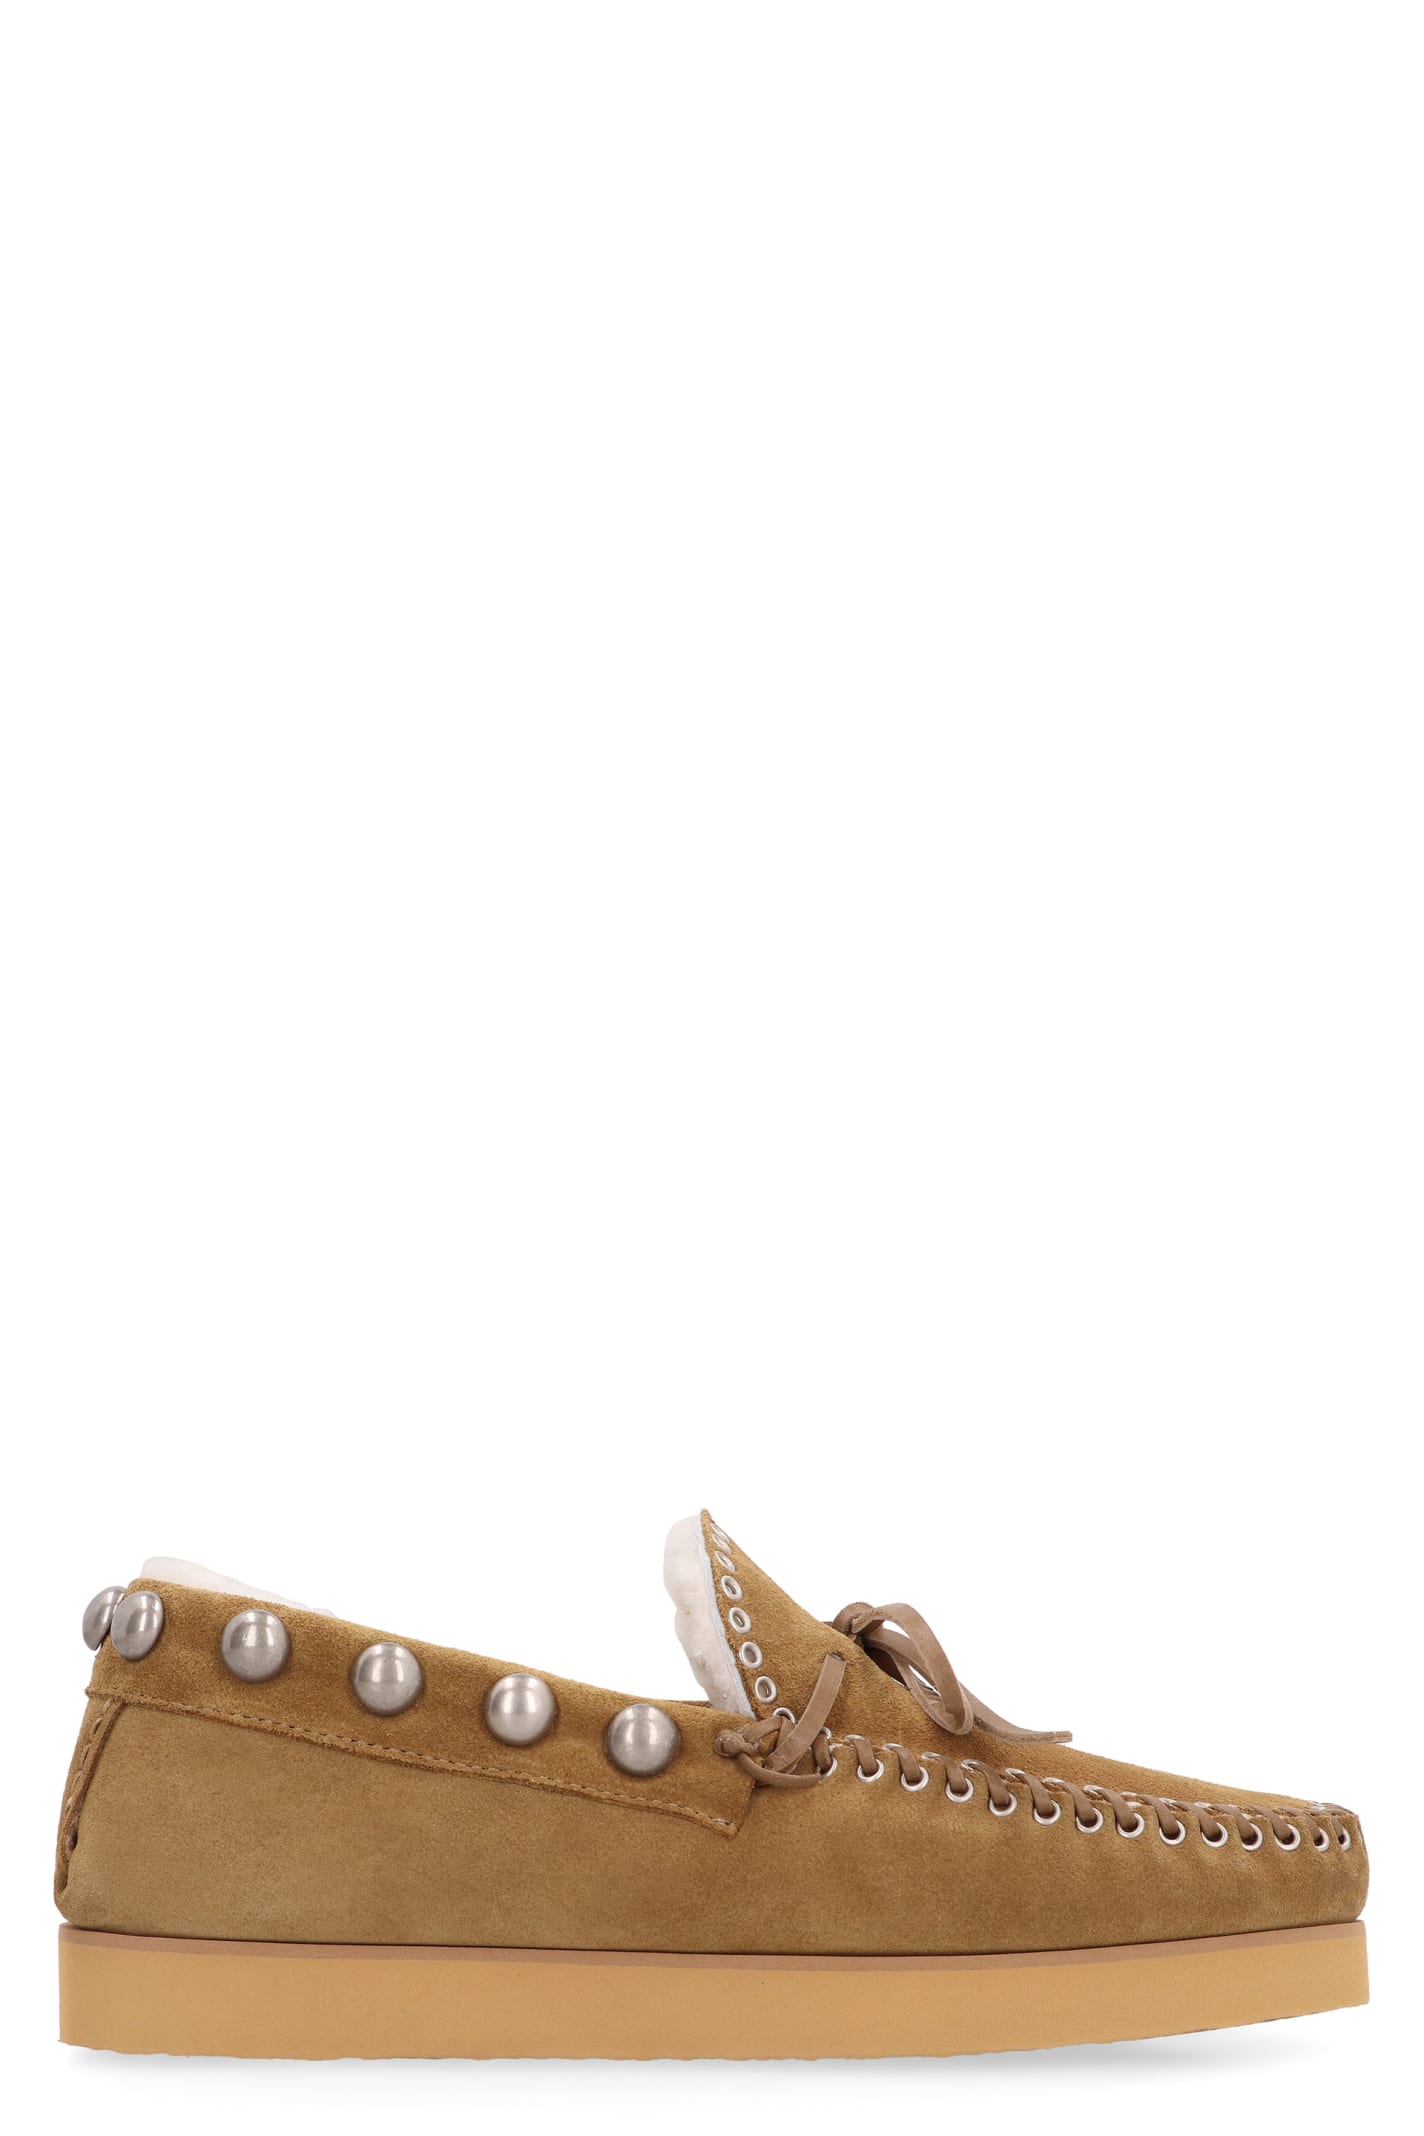 ISABEL MARANT FORLEY SUEDE LOAFERS